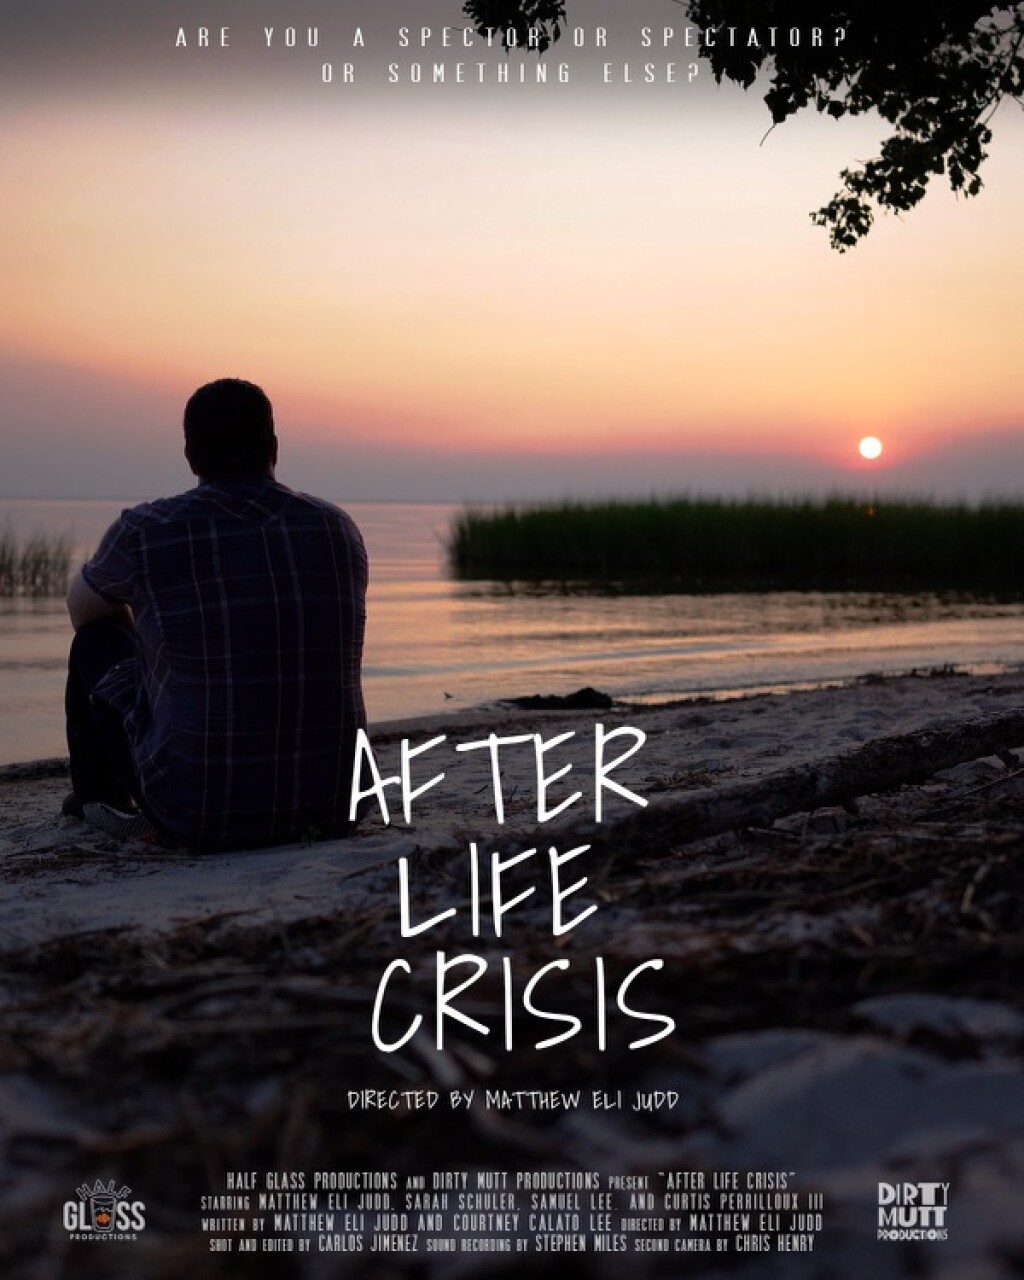 Filmposter for After Life Crisis